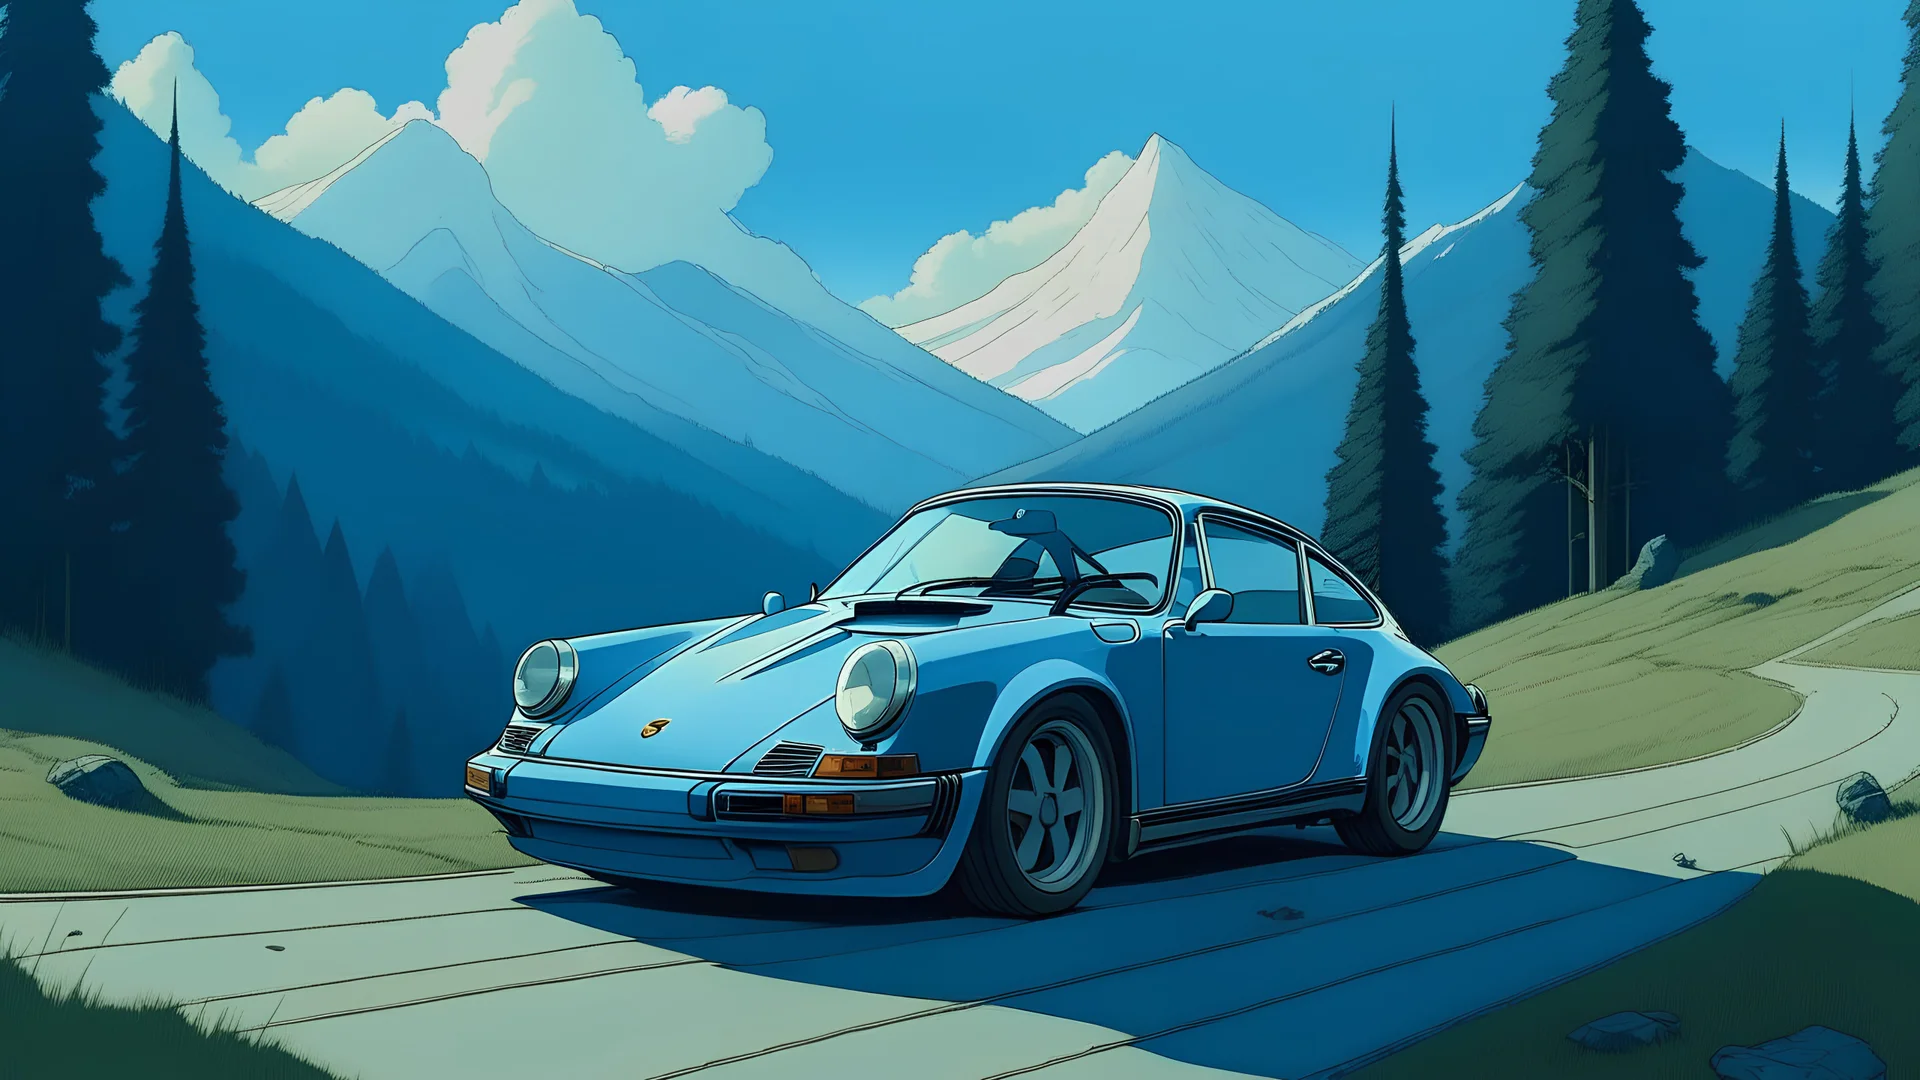 a porche 911, faded blue paint, driving on a mountain road, Ghibli style anime